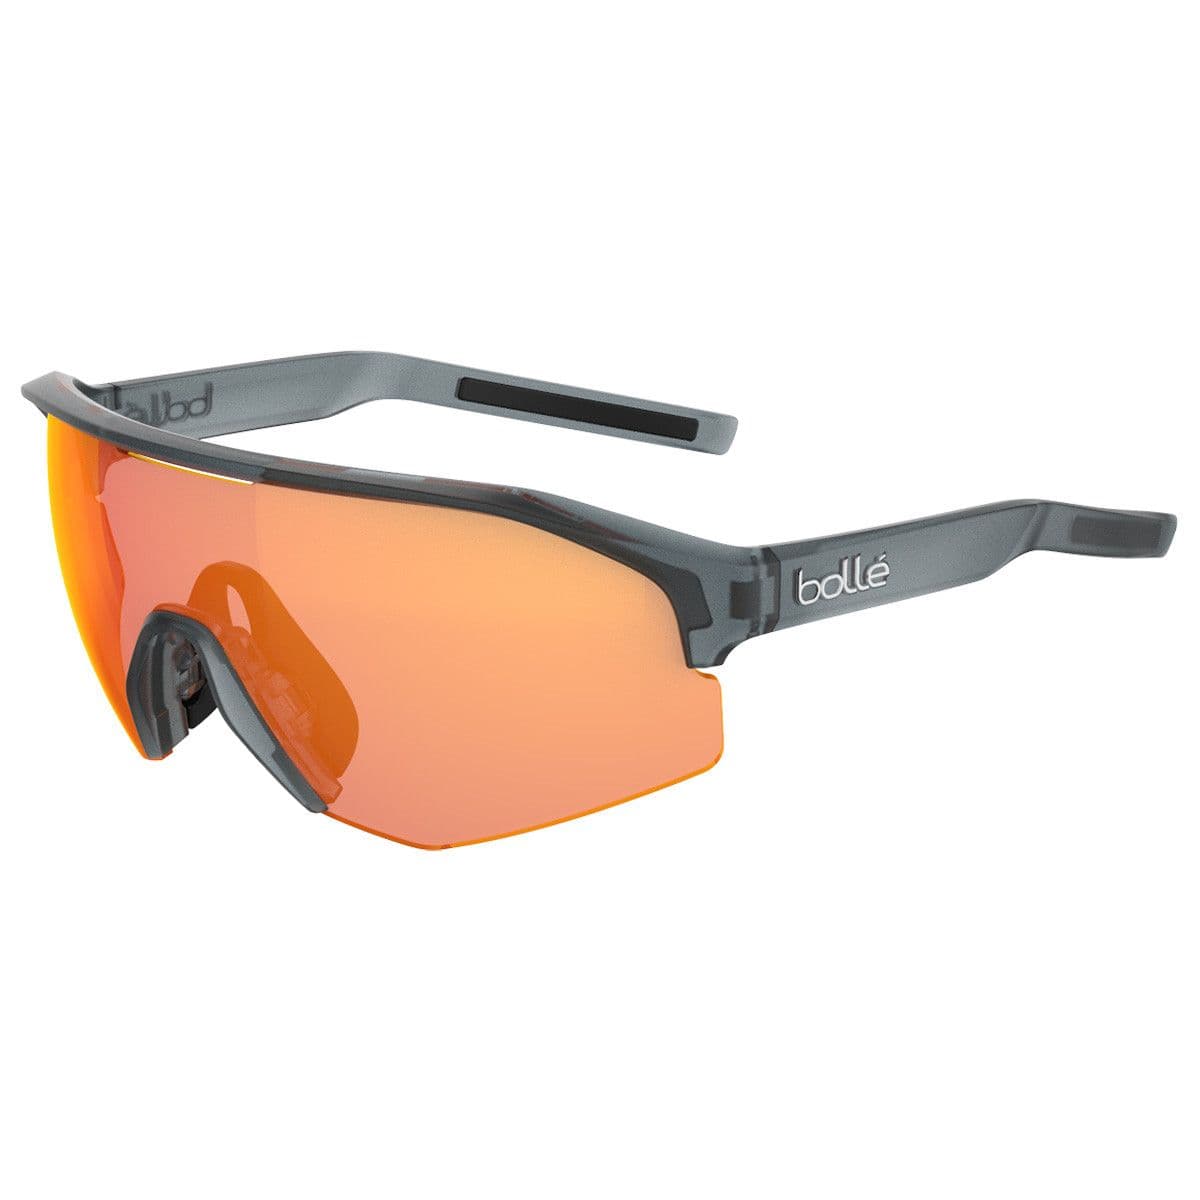 Bolle Lightshifter XL Sunglasses